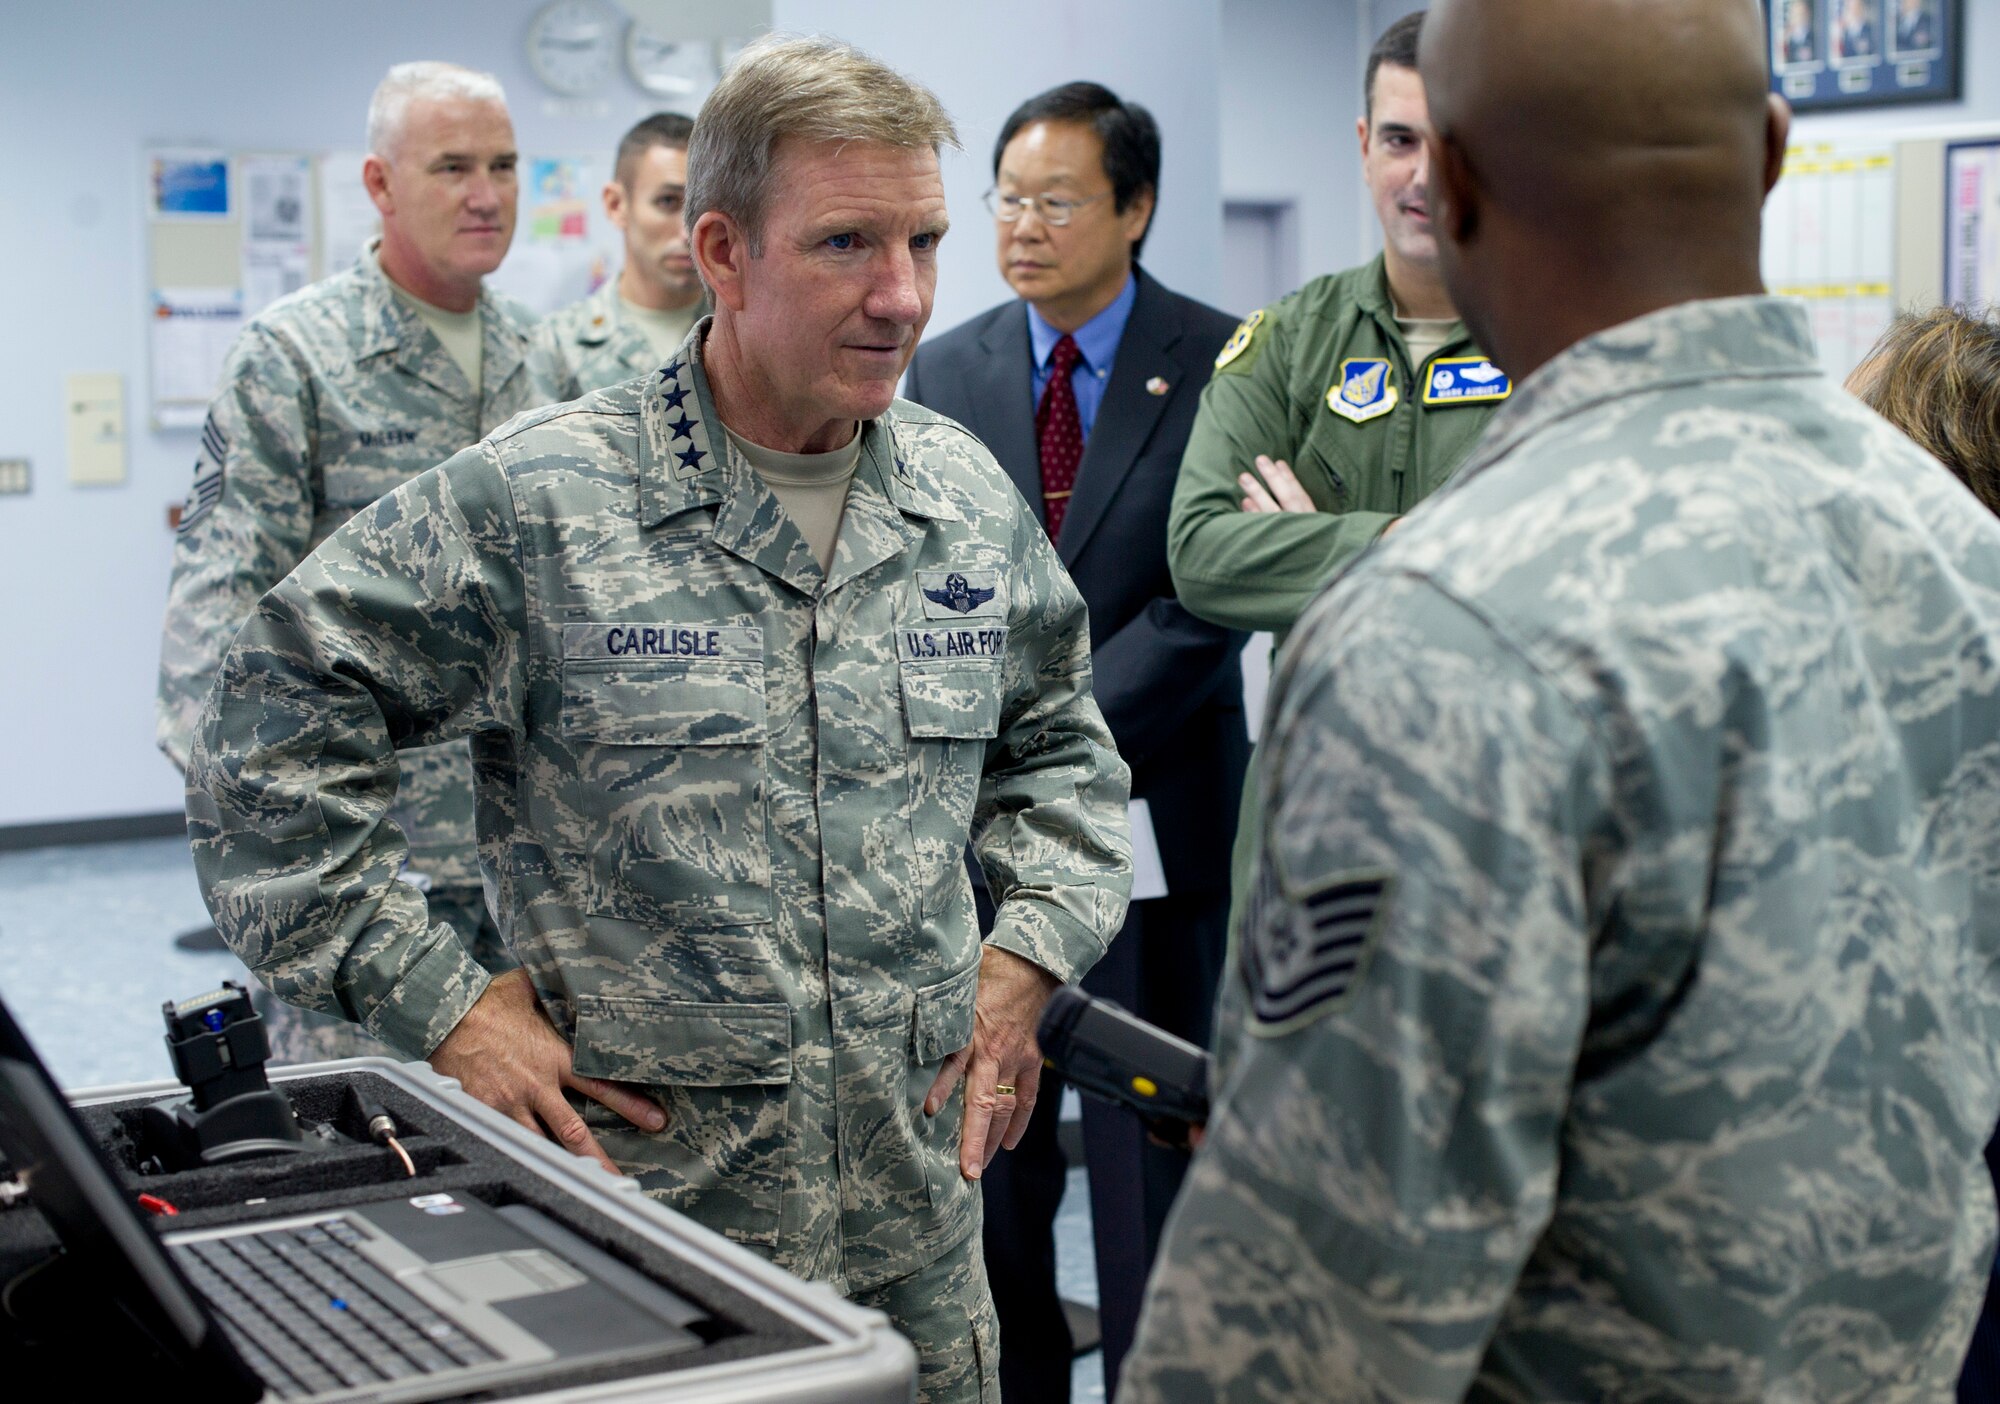 YOKOTA AIR BASE, Japan -- Gen. Herbert J. "Hawk" Carlisle, Pacific Air Forces commander, learns about the Noncombatant Evacuation Operations Tracking System during his visit to Yokota Air Base, Japan, Oct. 23, 2012. The tracking system allows bases to maintain accountability of evacuees and make sure they arrive at their destination. (U.S. Air Force photo by Staff Sgt. Stacy Moless)